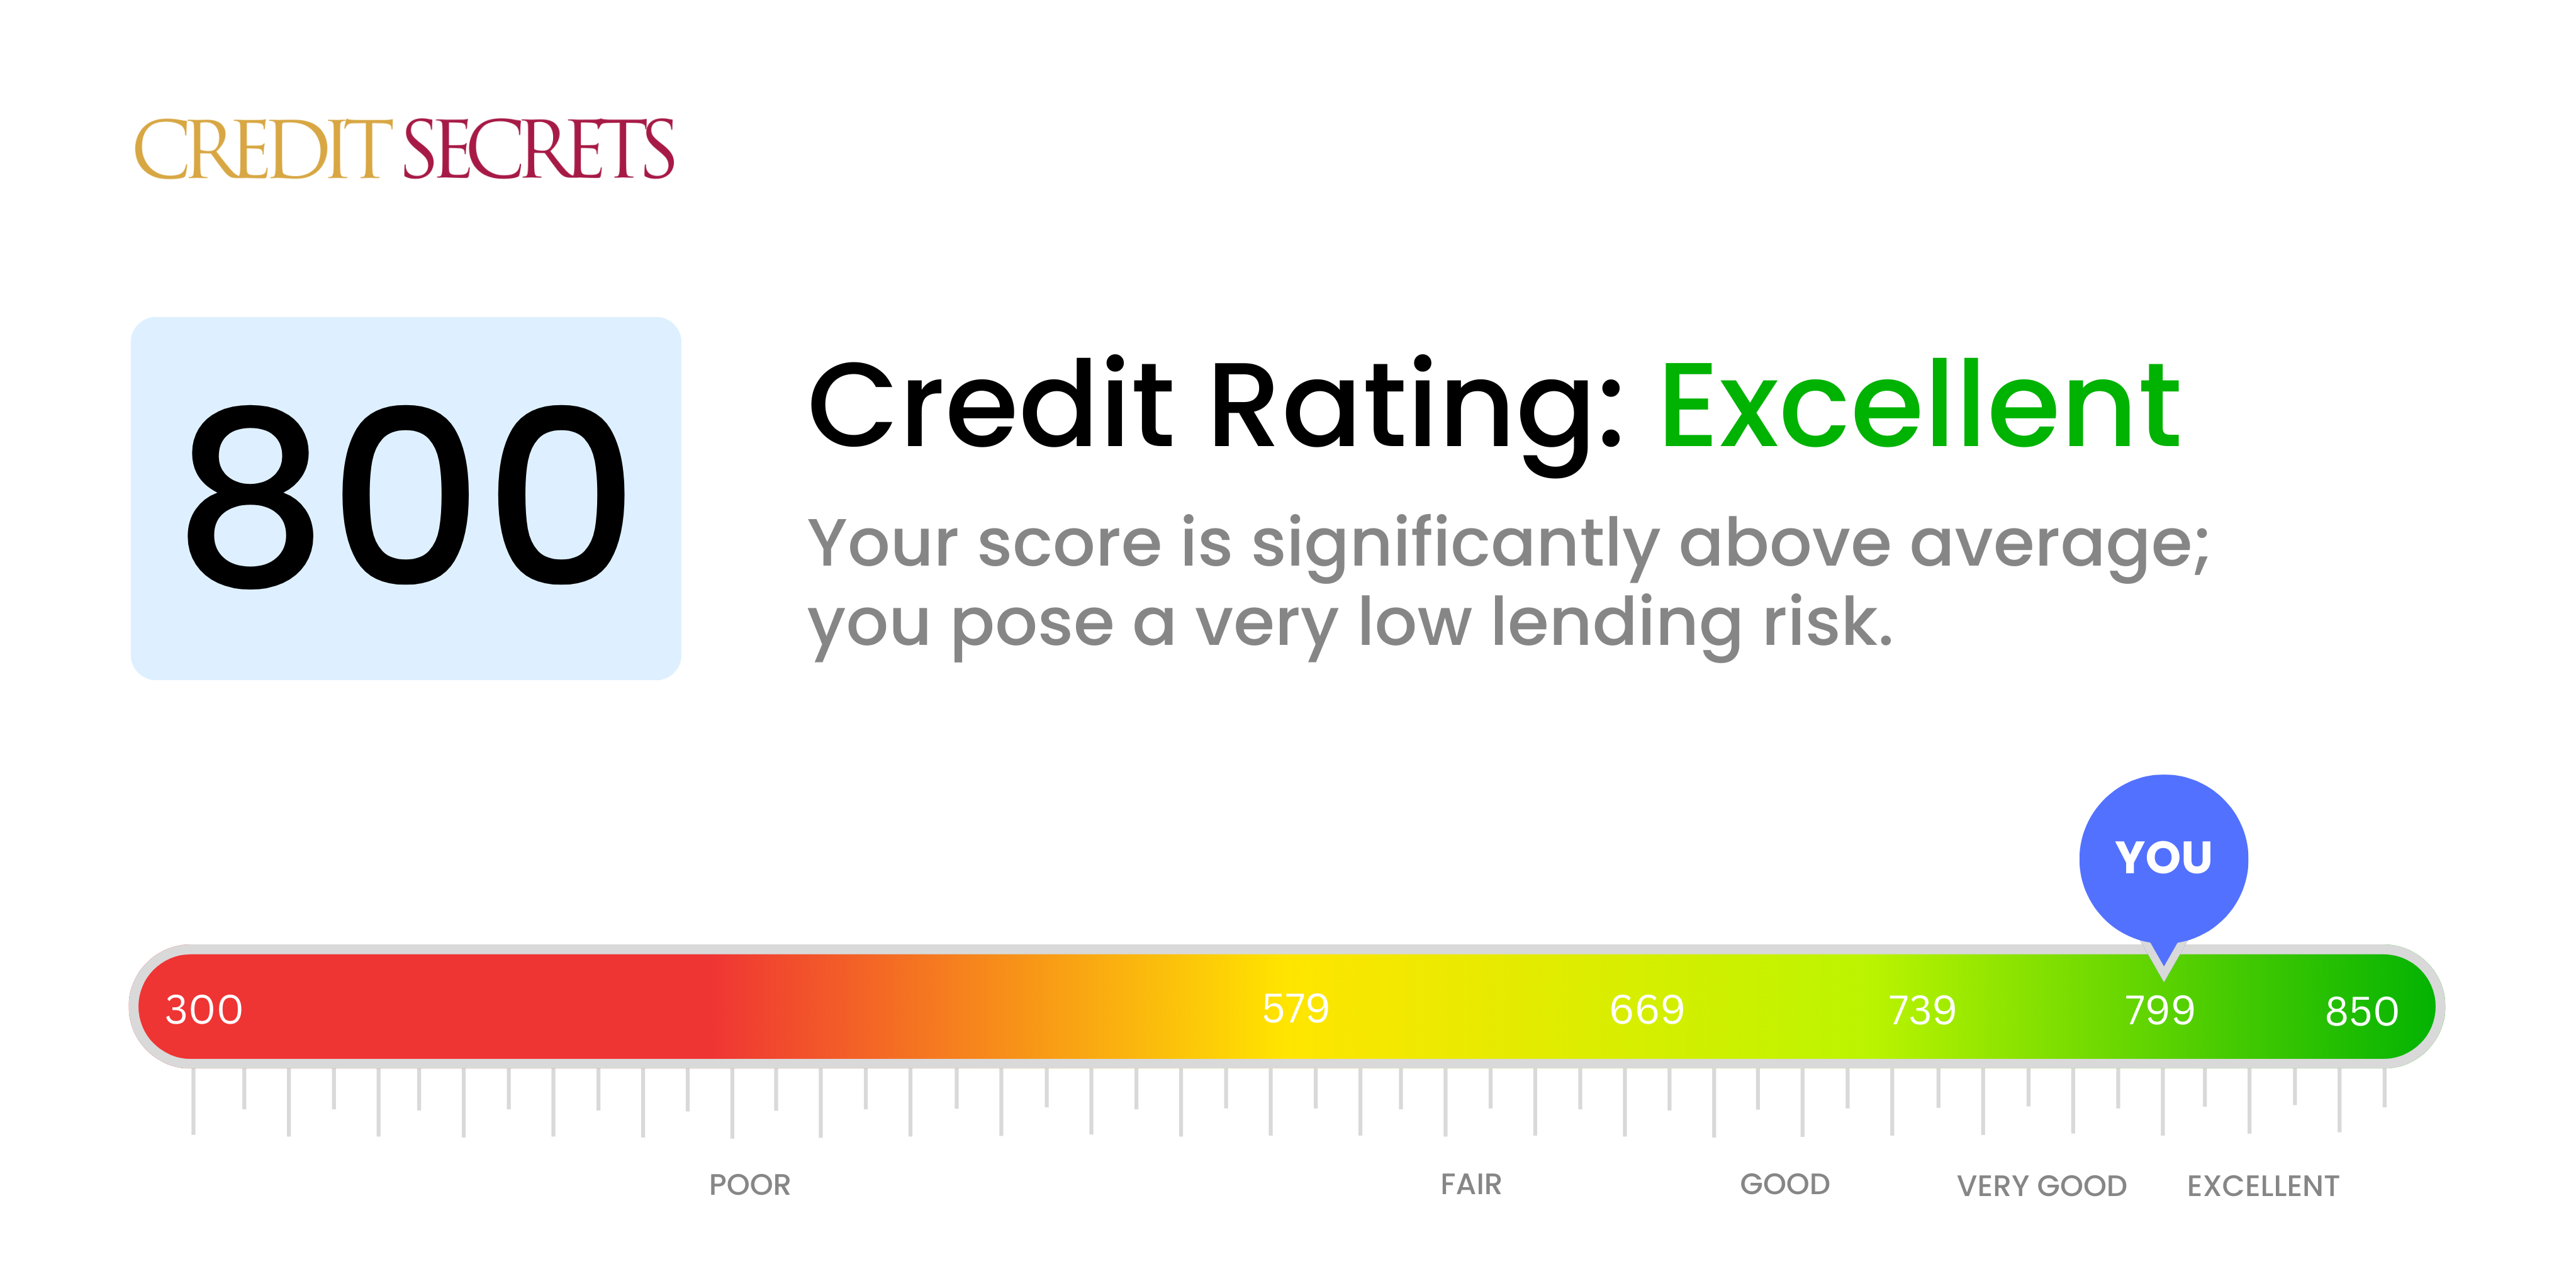 Is 800 a good credit score?